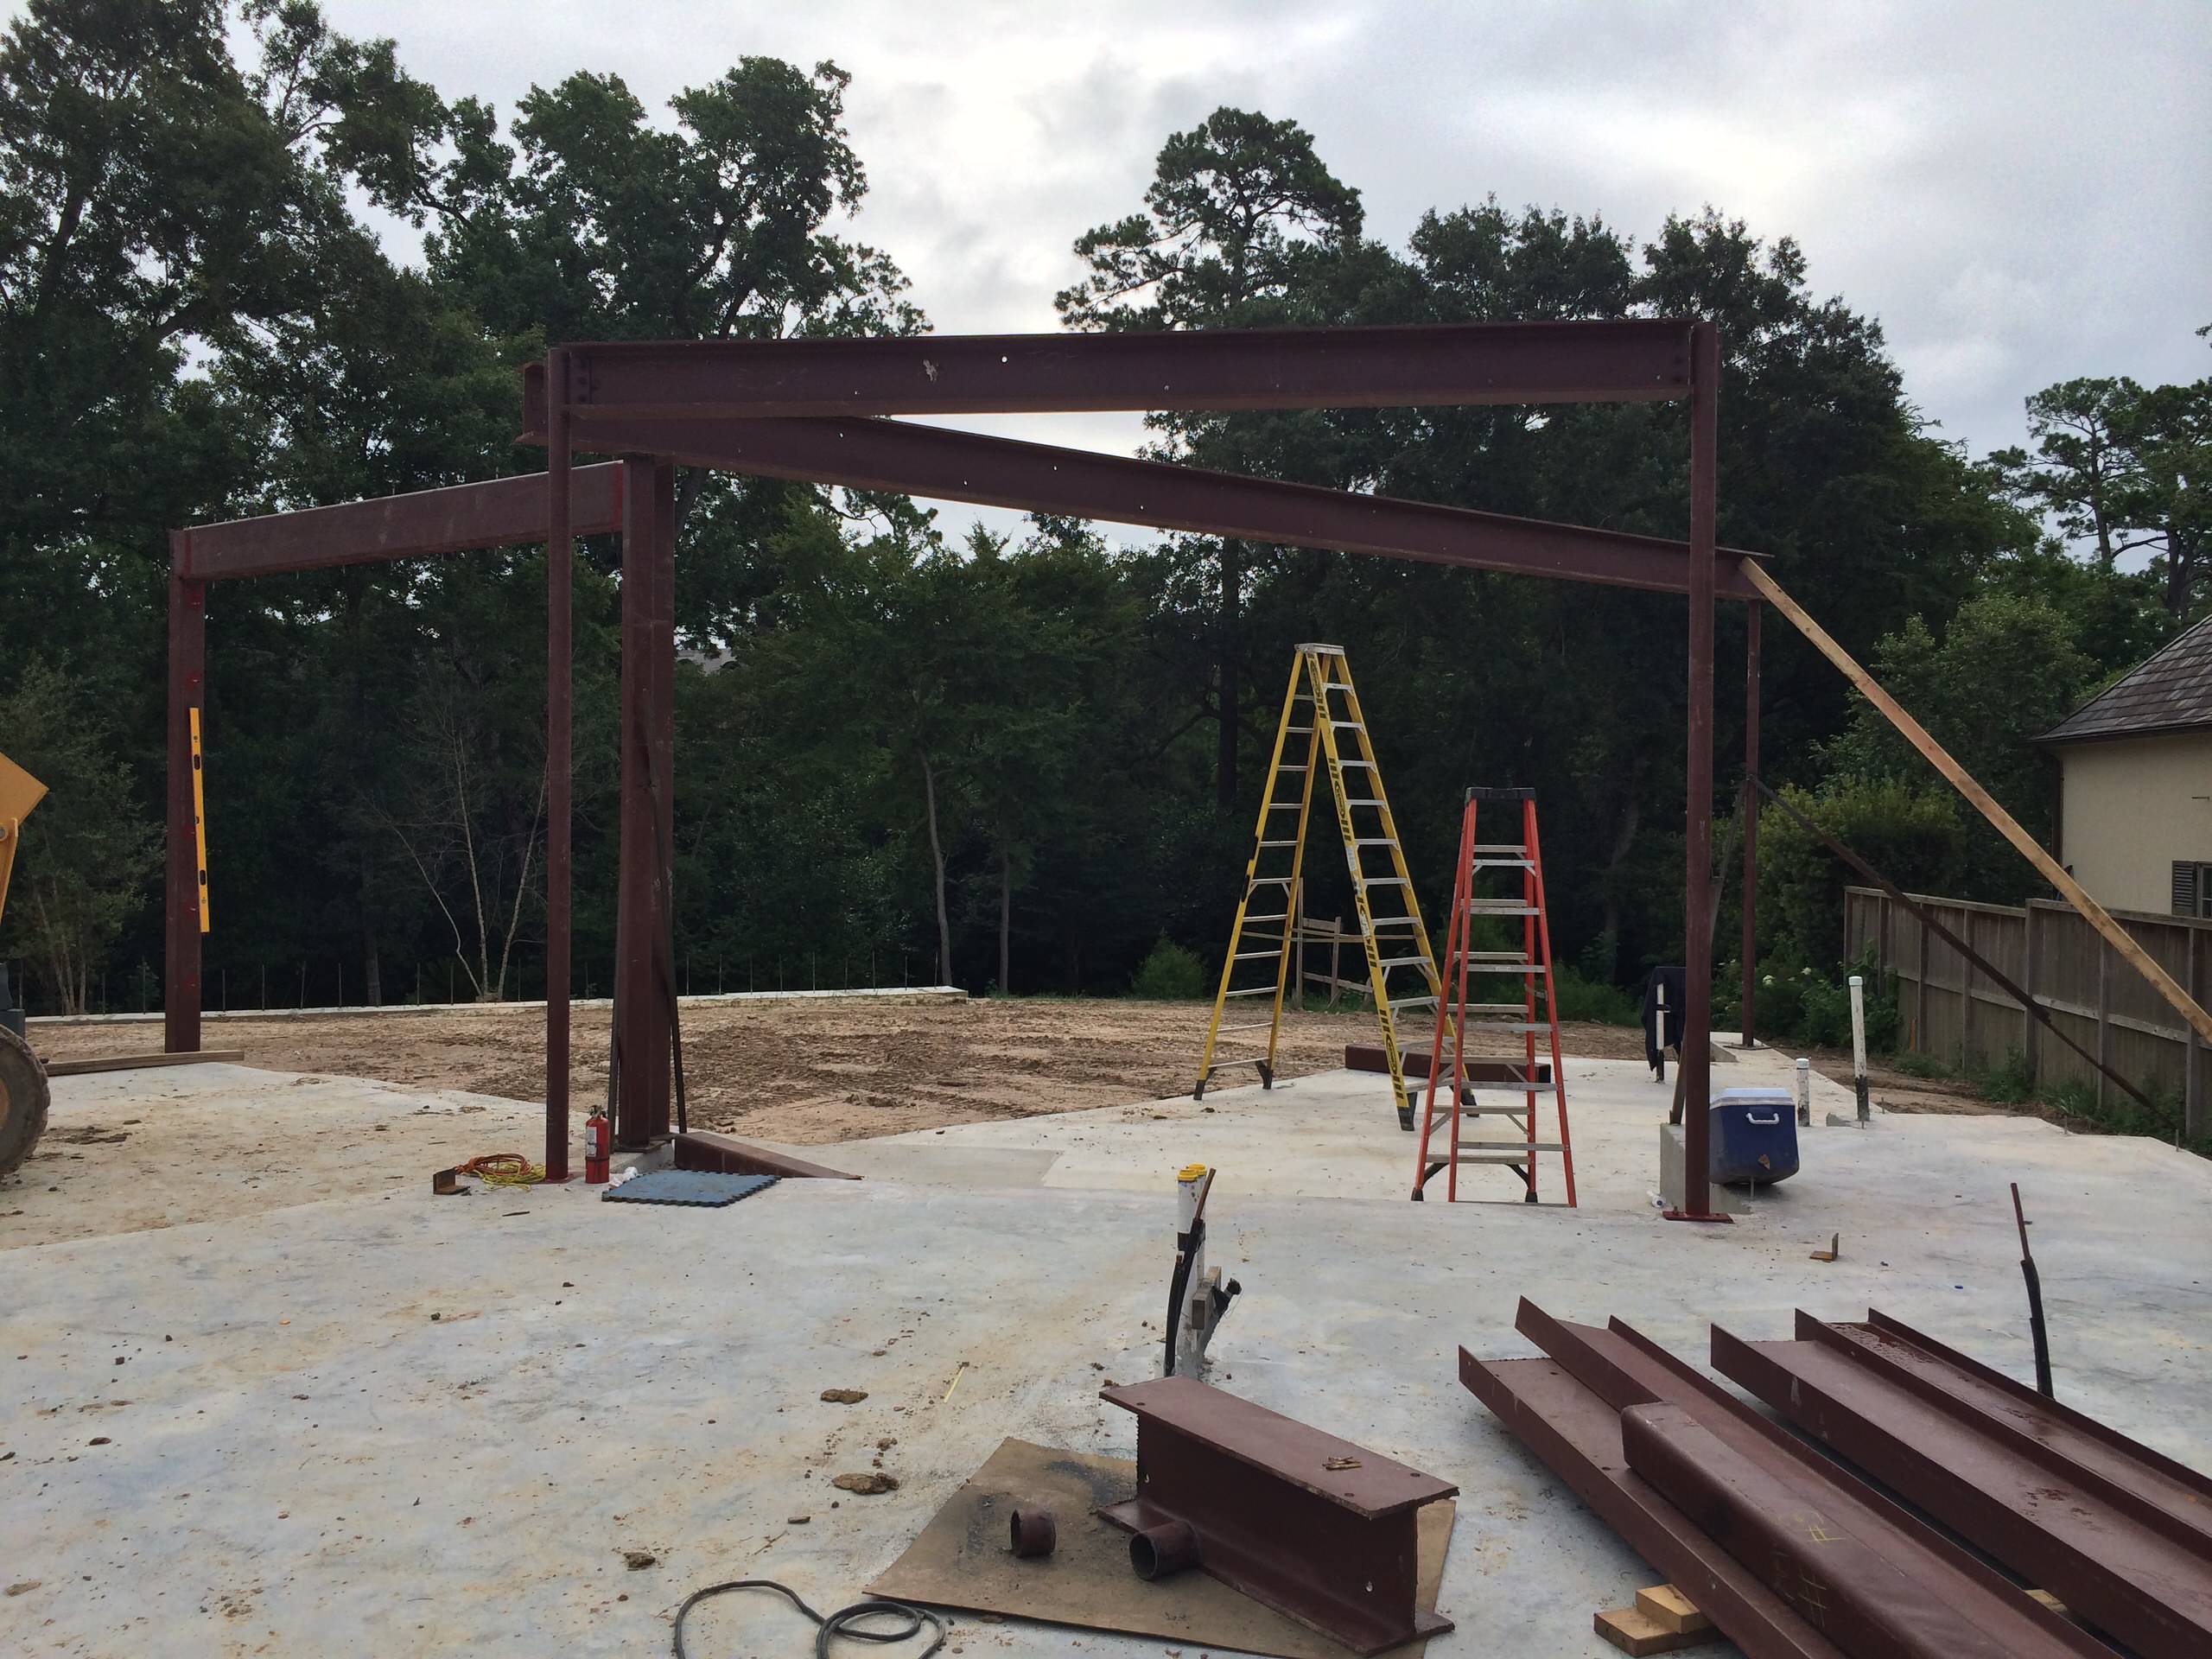 Structural steel